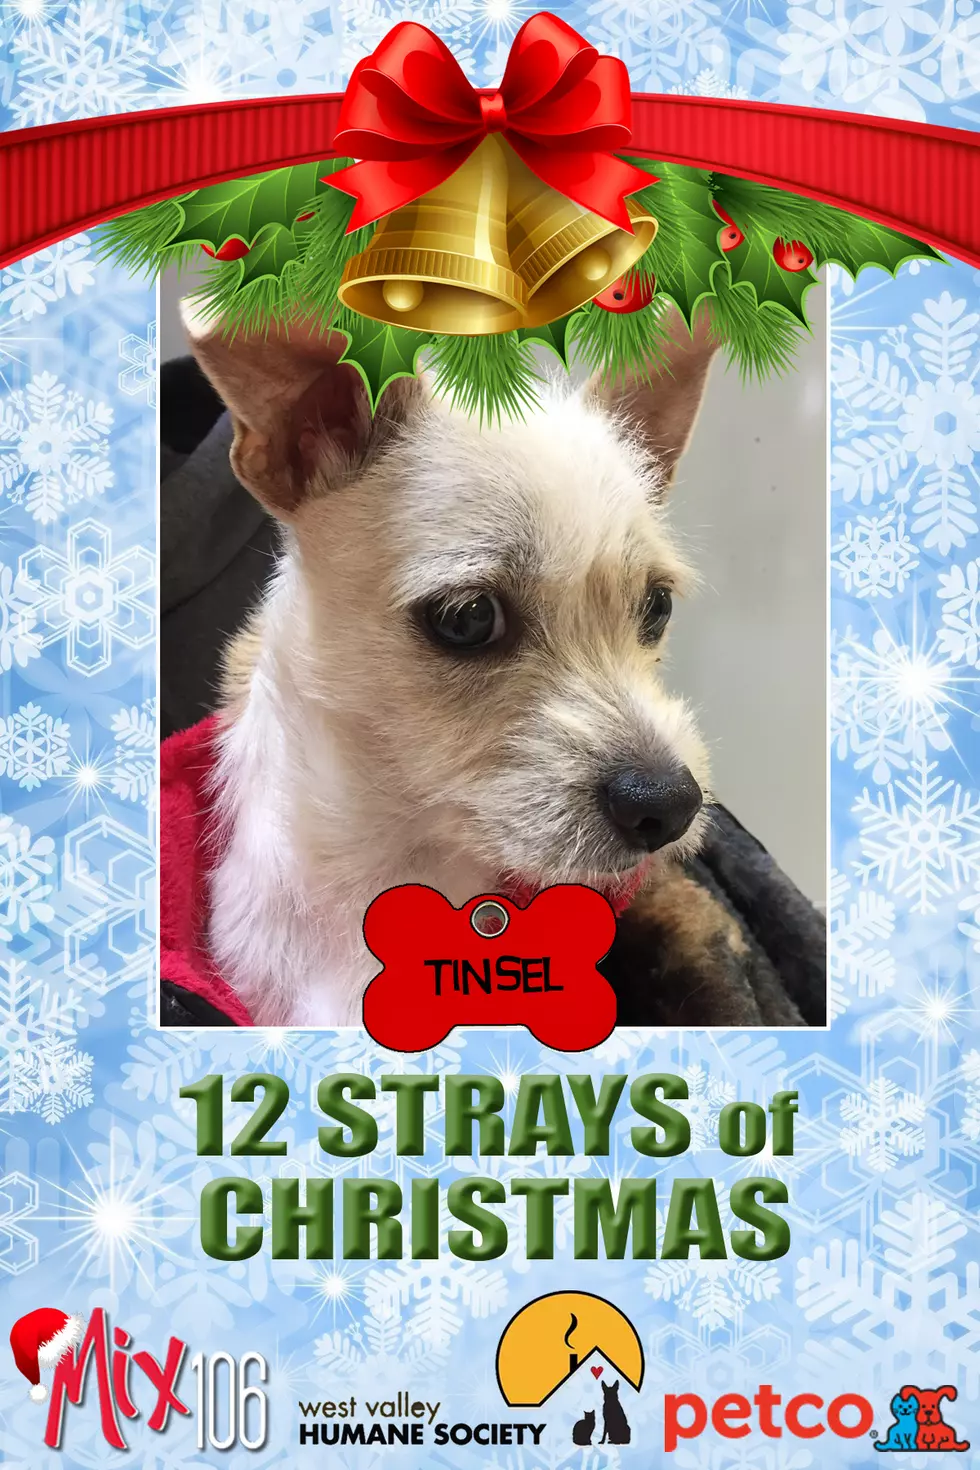 #5 of The 12 Strays of Christmas – Tinsel